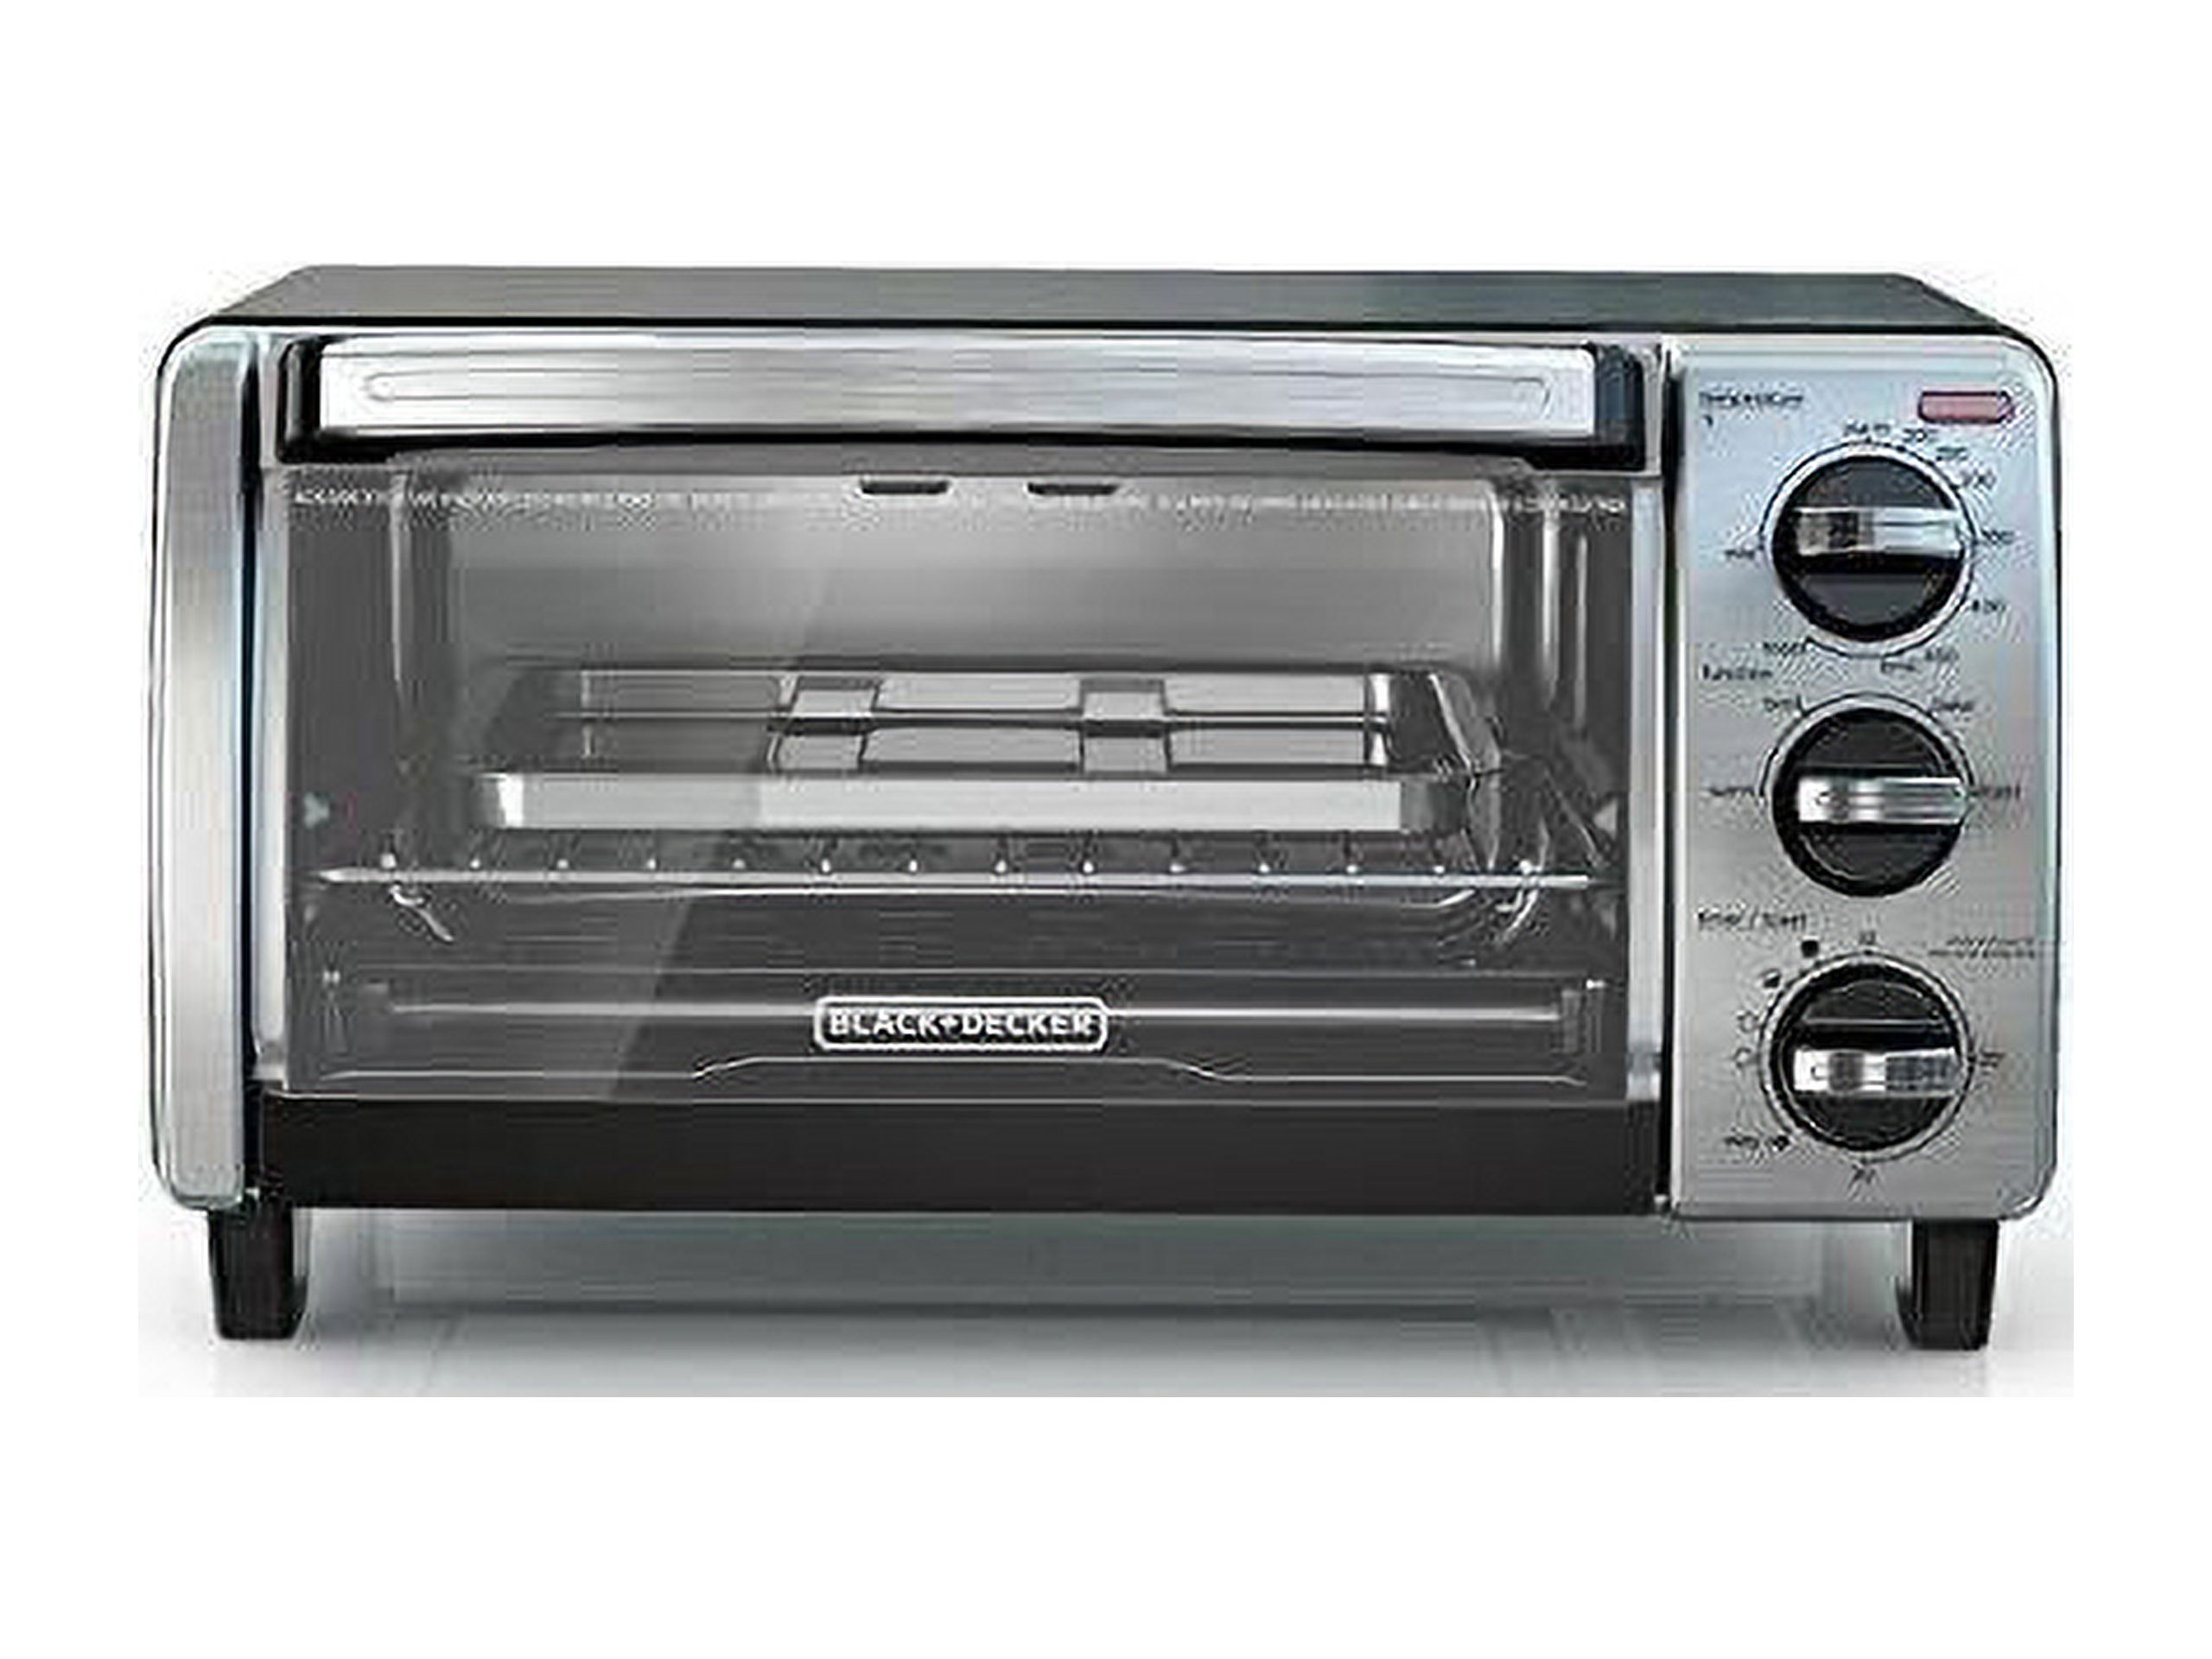 BLACK+DECKER 4-Slice Toaster Oven with Natural Convection, Black, TO1750SB - image 2 of 12